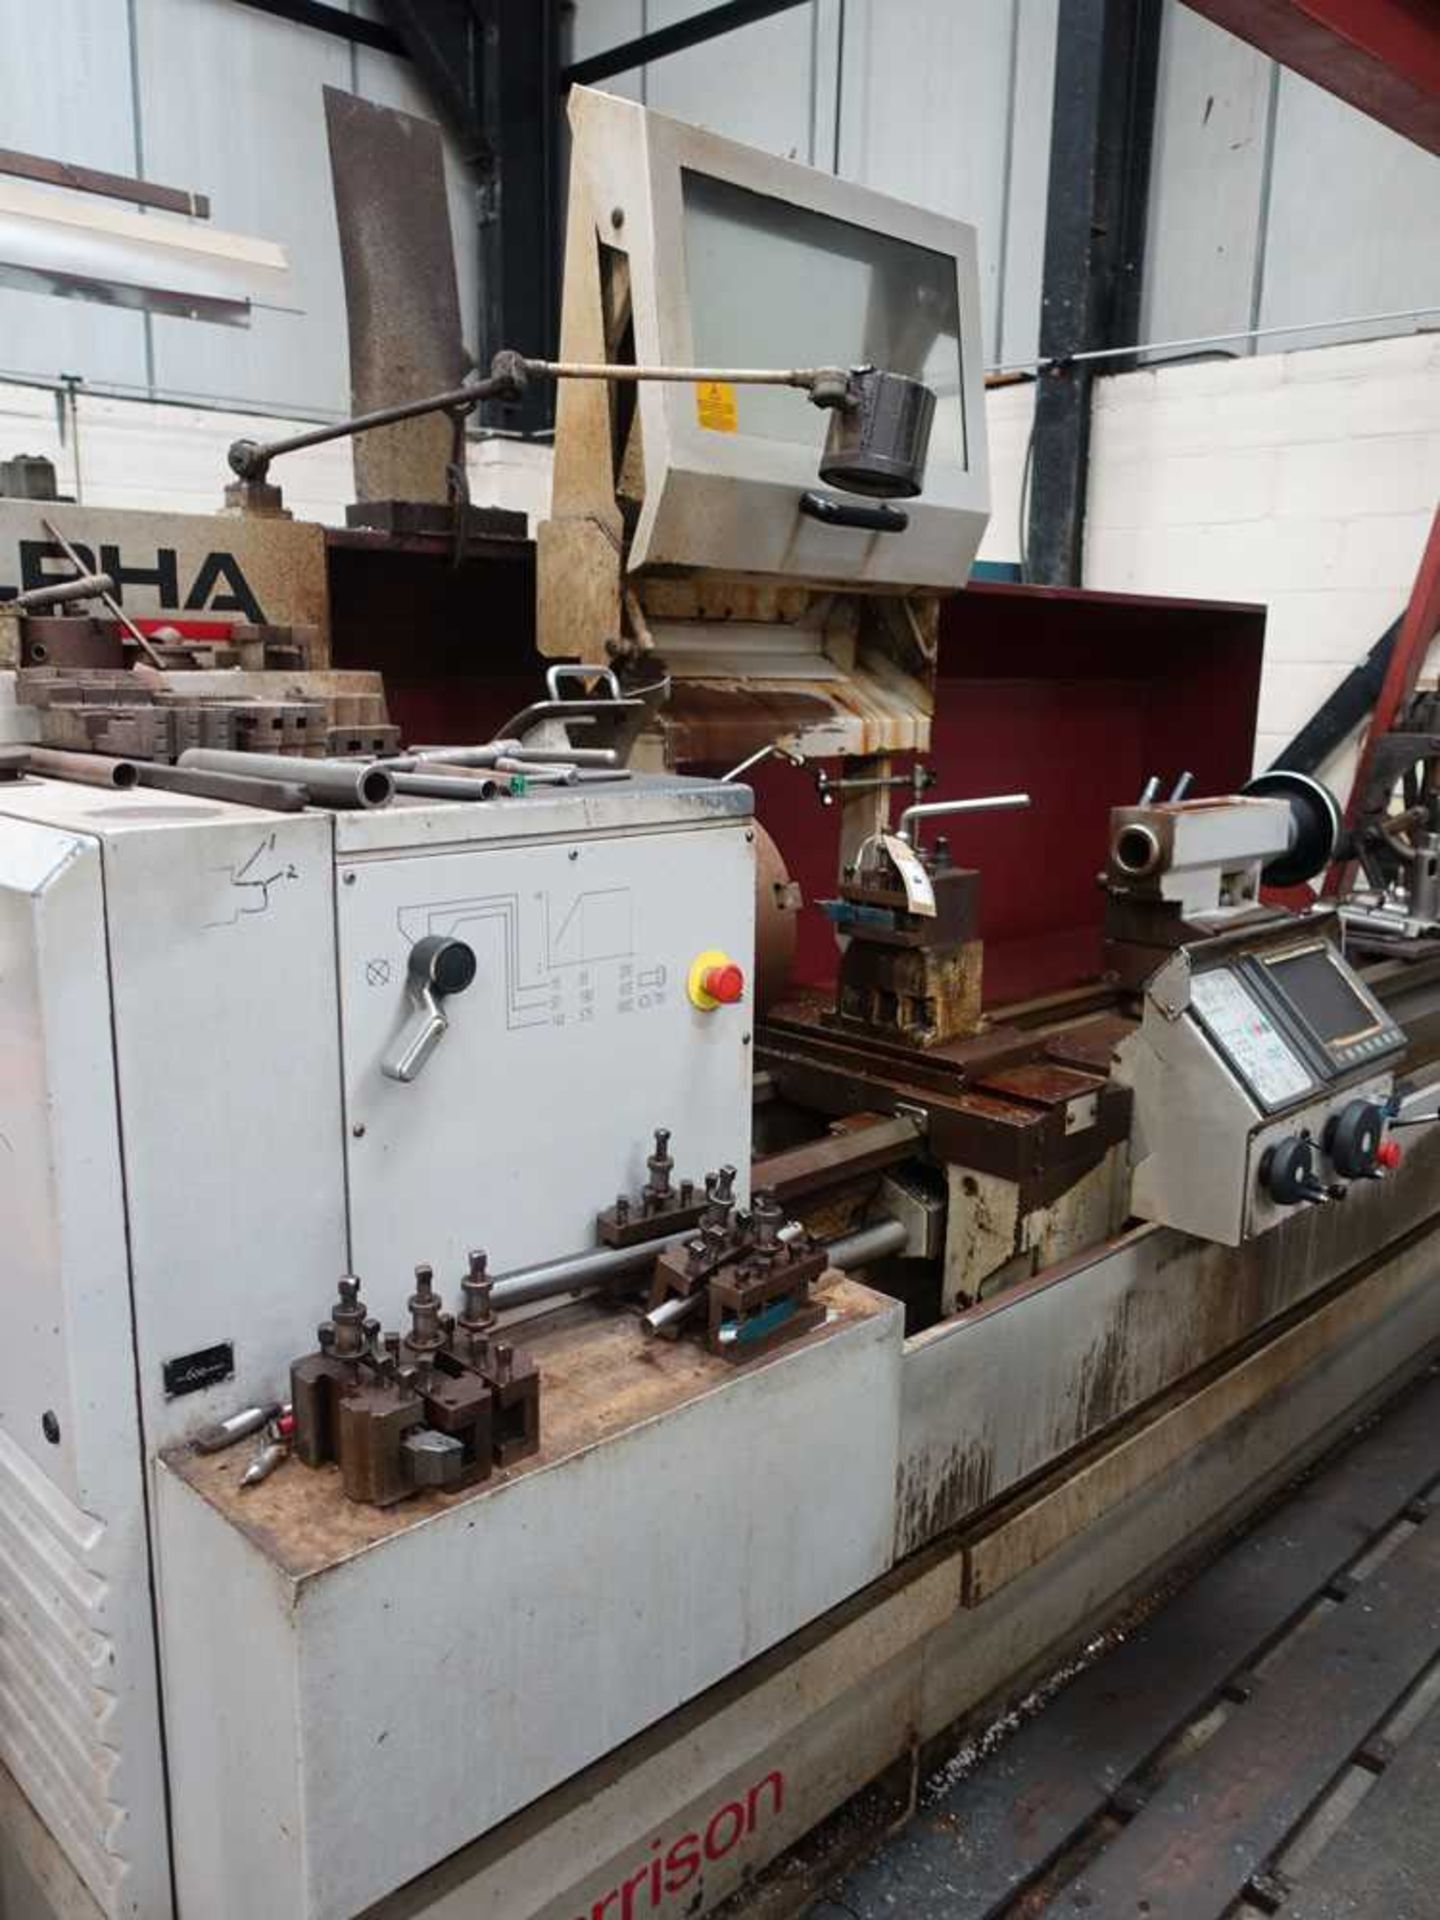 Harrison Alpha 550 CNC lathe, year 1996, serial no: A50140 with 2 x 3 jaw and 1 x 4 jaw chuck, - Image 2 of 10